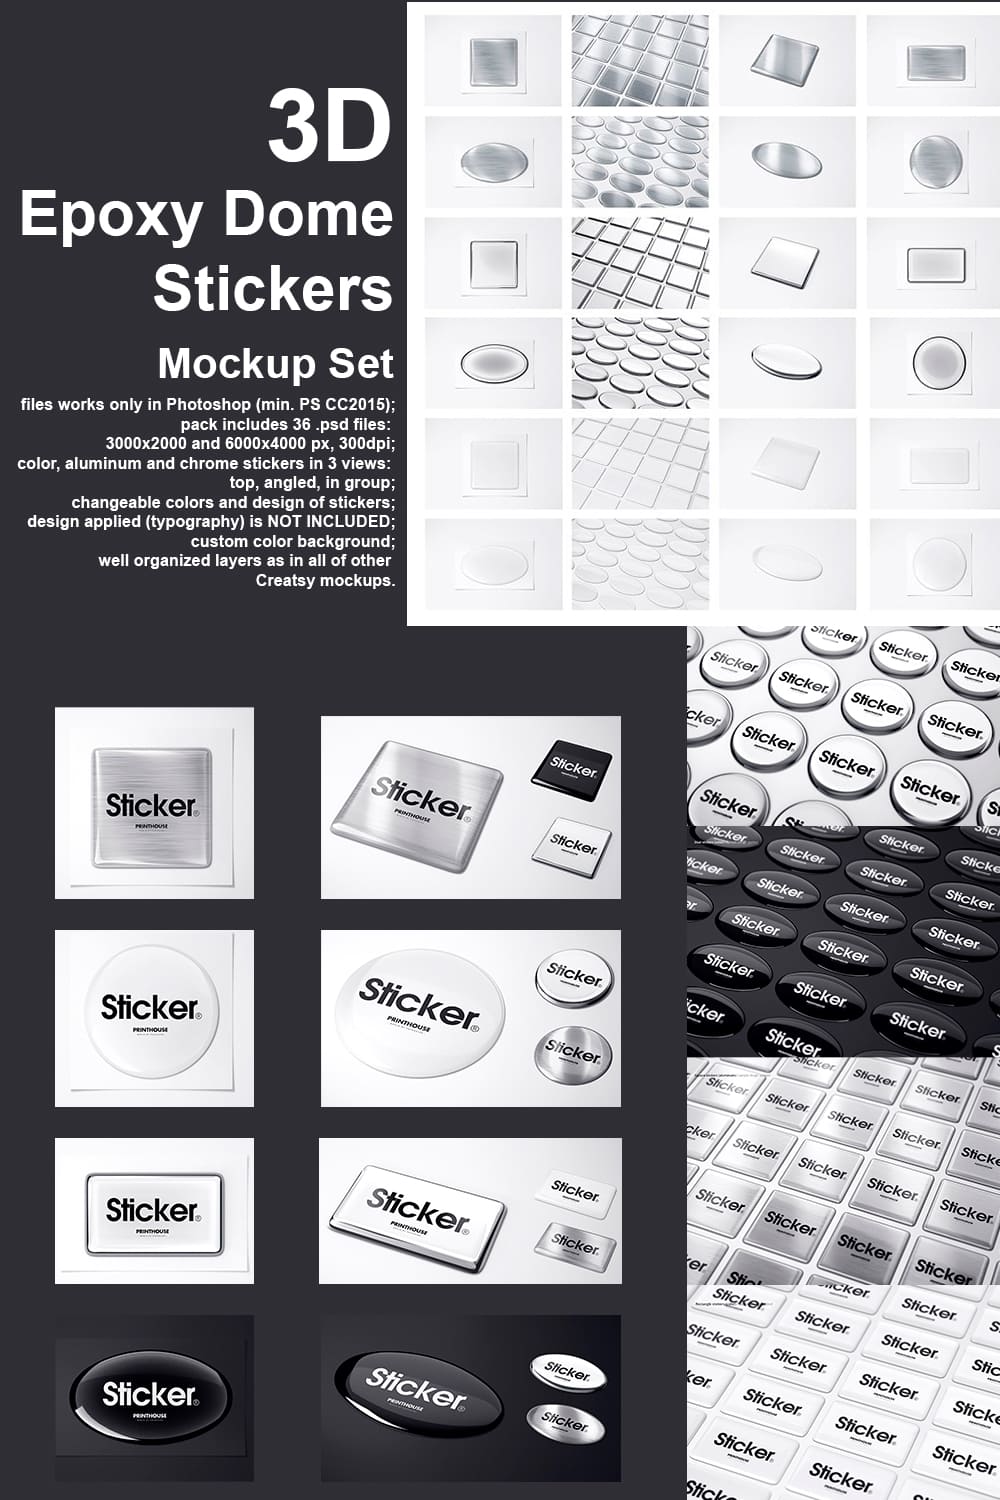 A set of images of gorgeous 3d epoxy stickers.